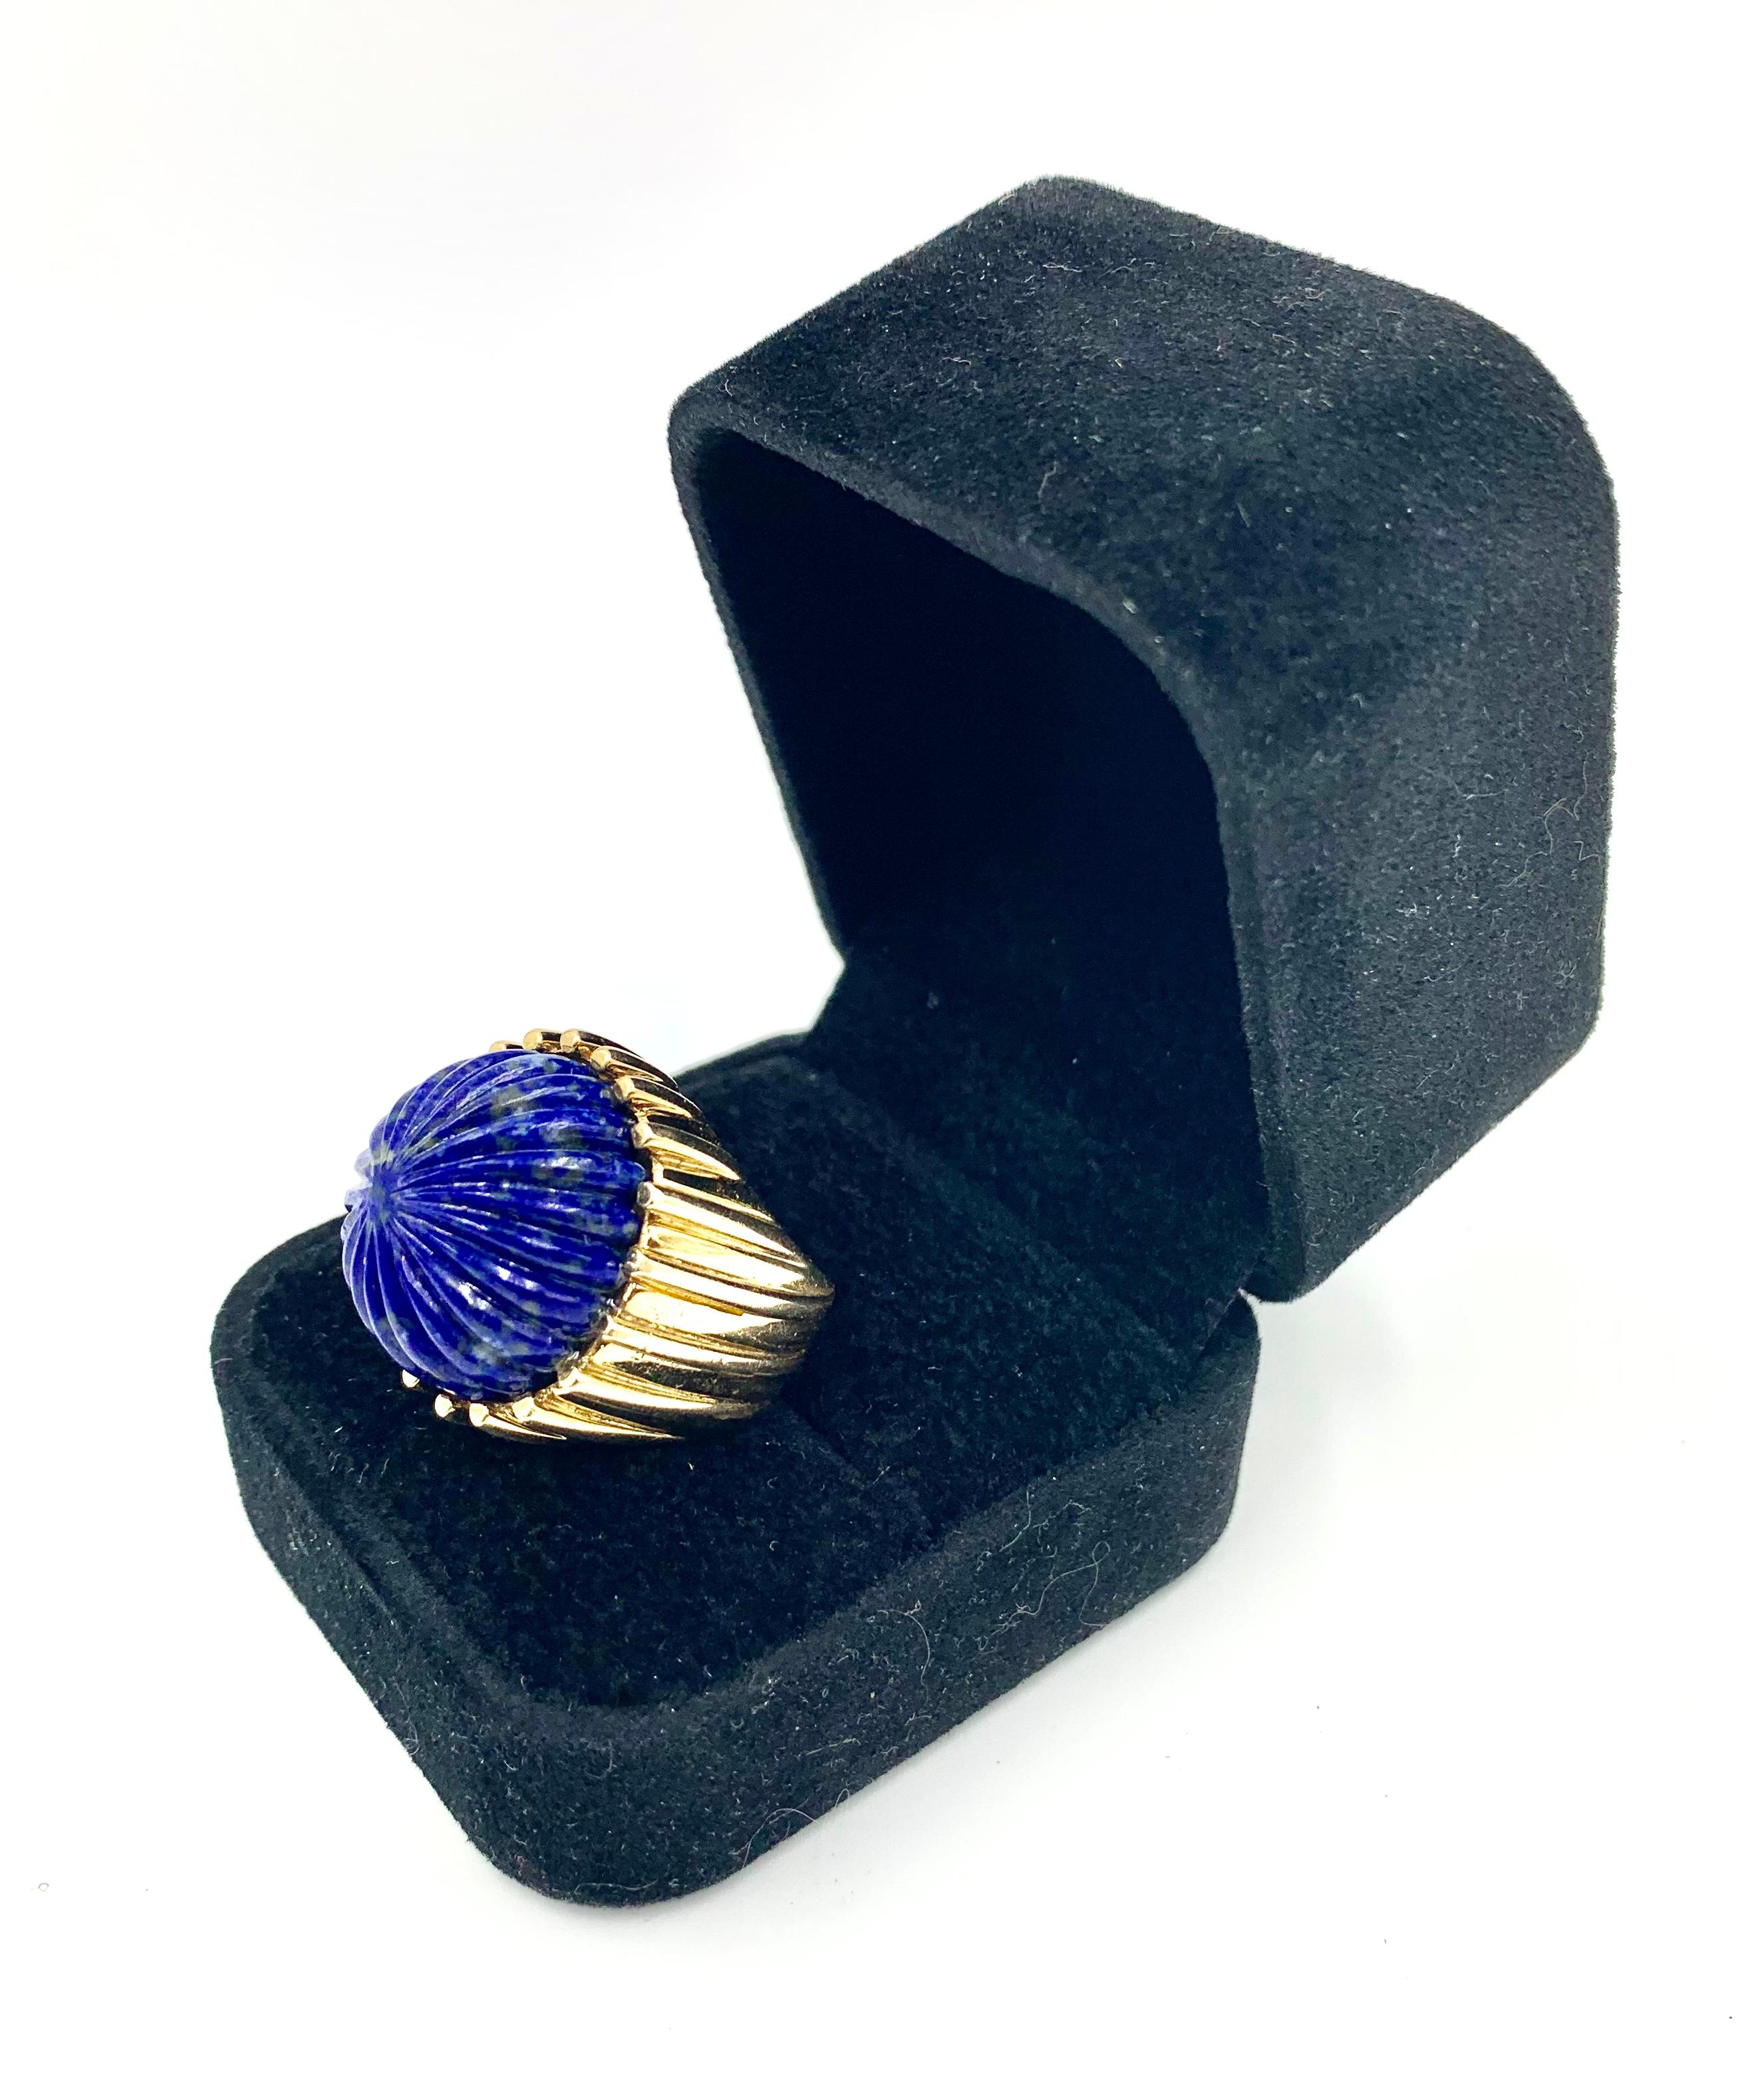 Large Estate Carved Lapis Lazuli Fluted 14K Yellow Gold Cocktail Ring, 1980's For Sale 5